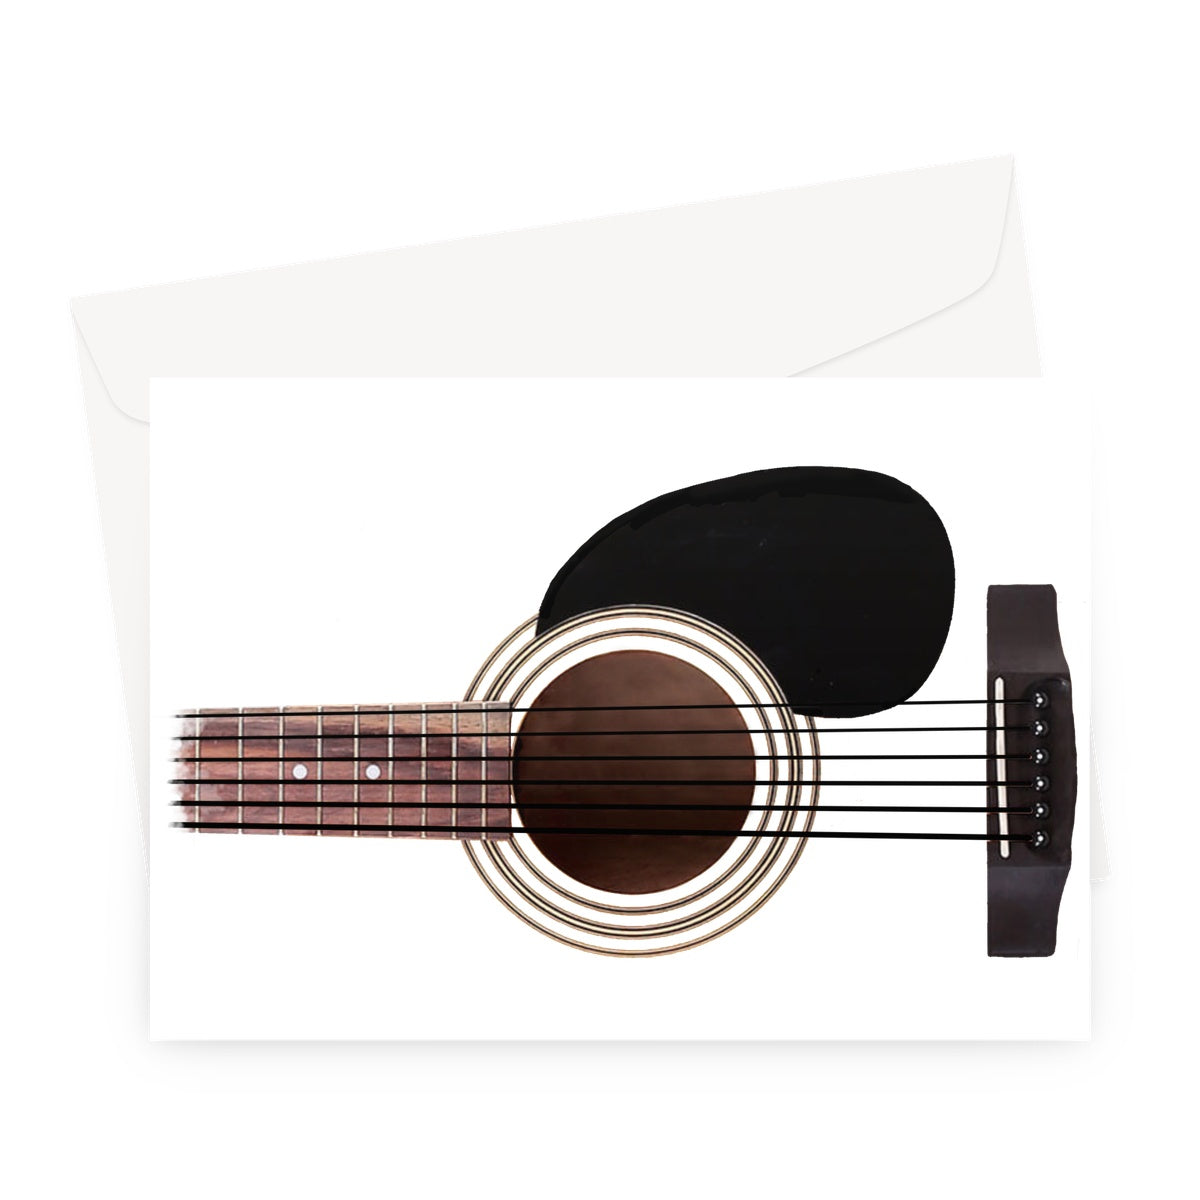 Guitar Neck and Strings Greeting Card